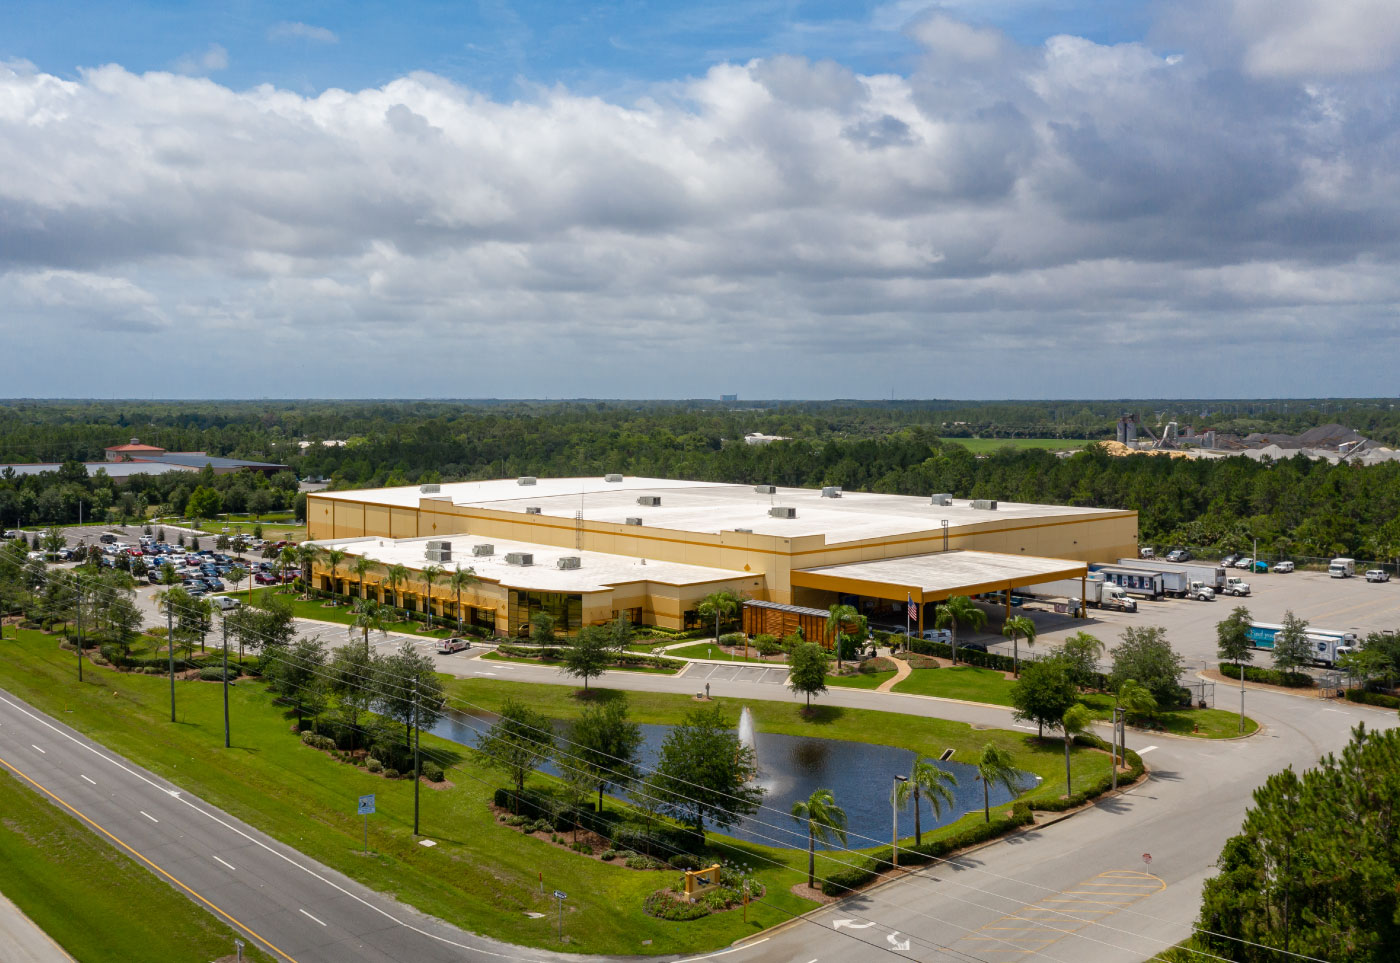 Aerial View of SR Perrott Distribution Facility Built by ARCO Beverage Group in Florida